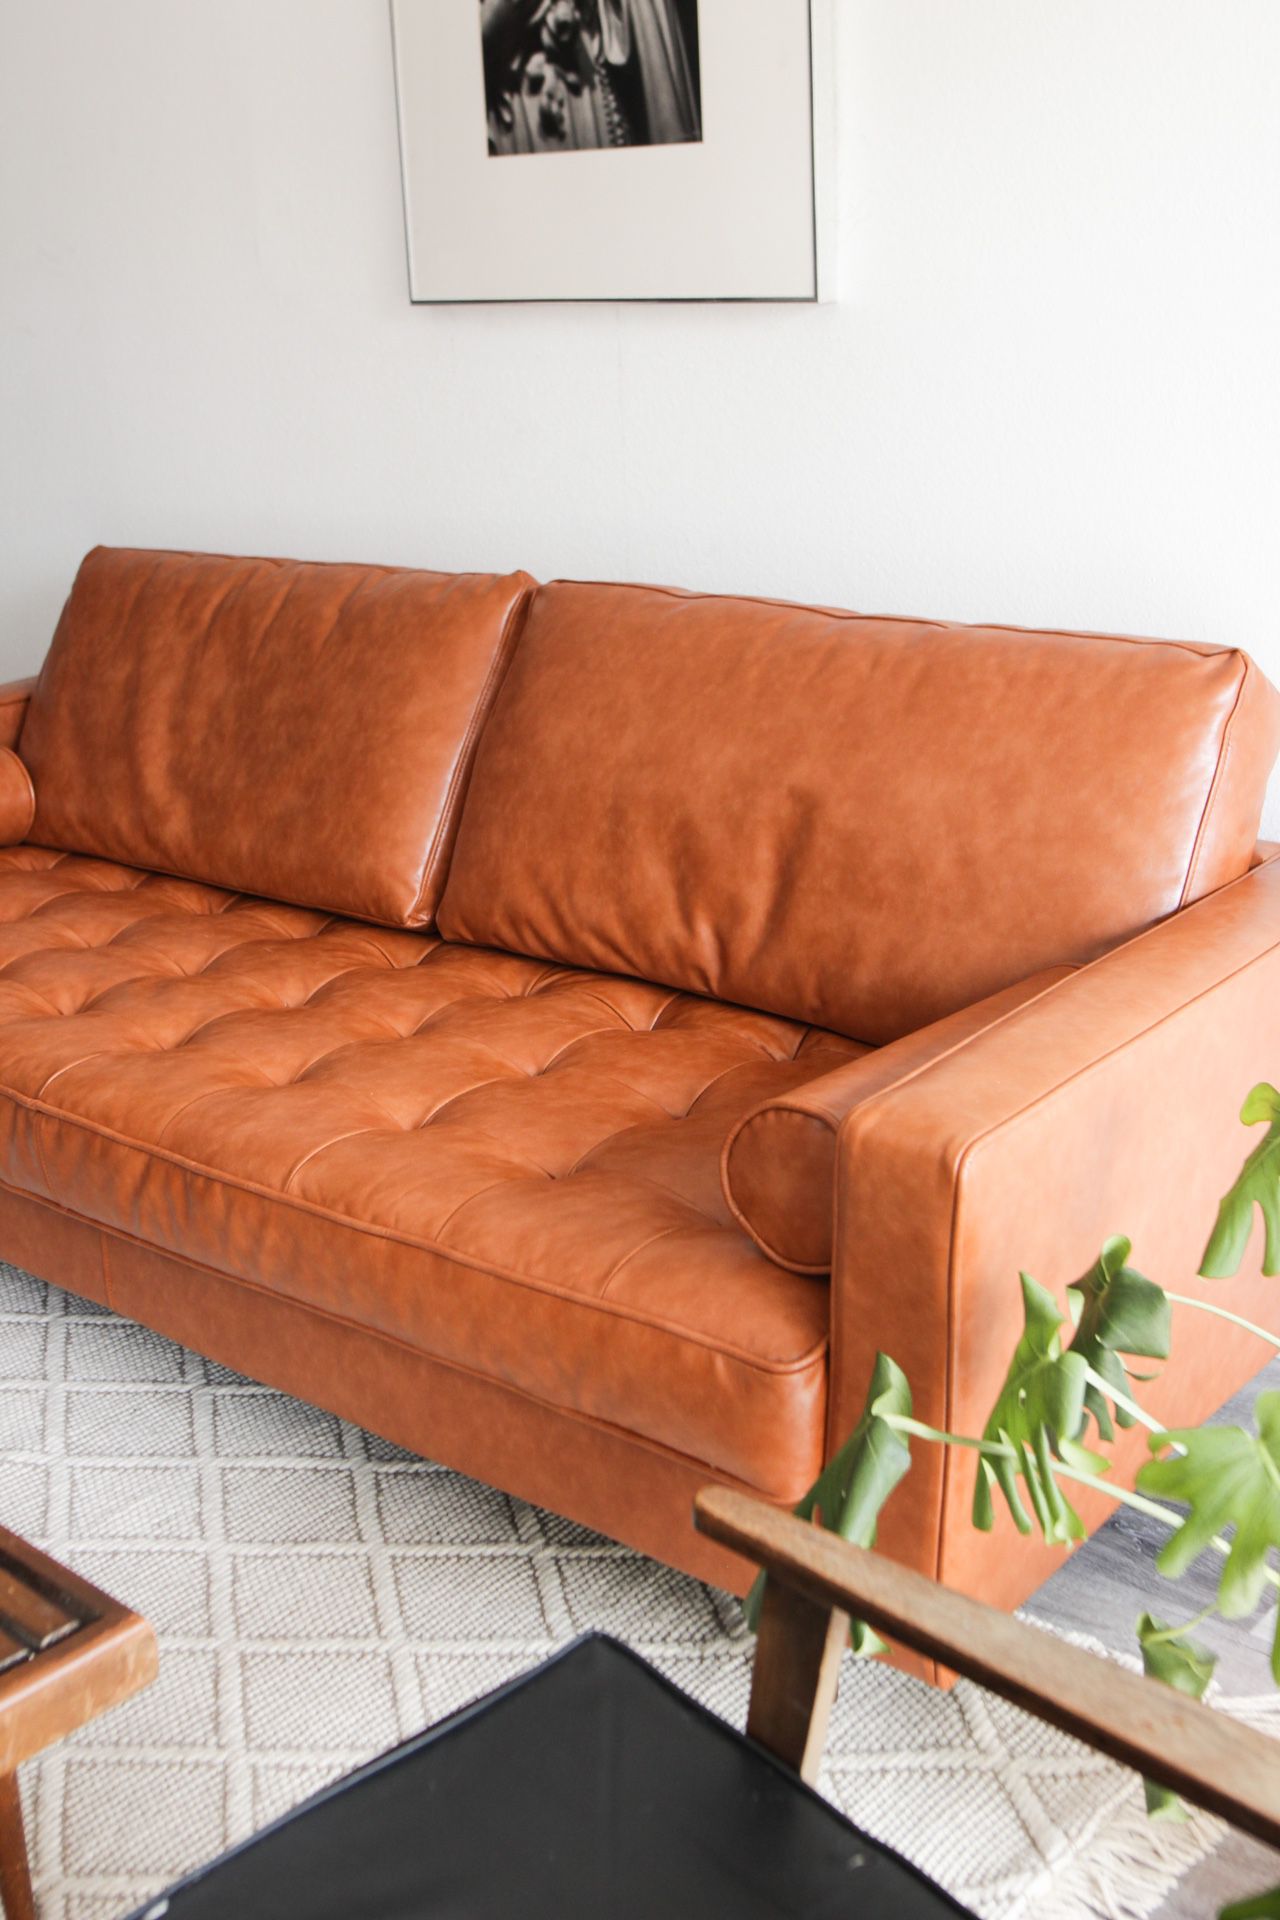 FREE DELIVERY 🚚 MCM Genuine Leather Sofa Couch